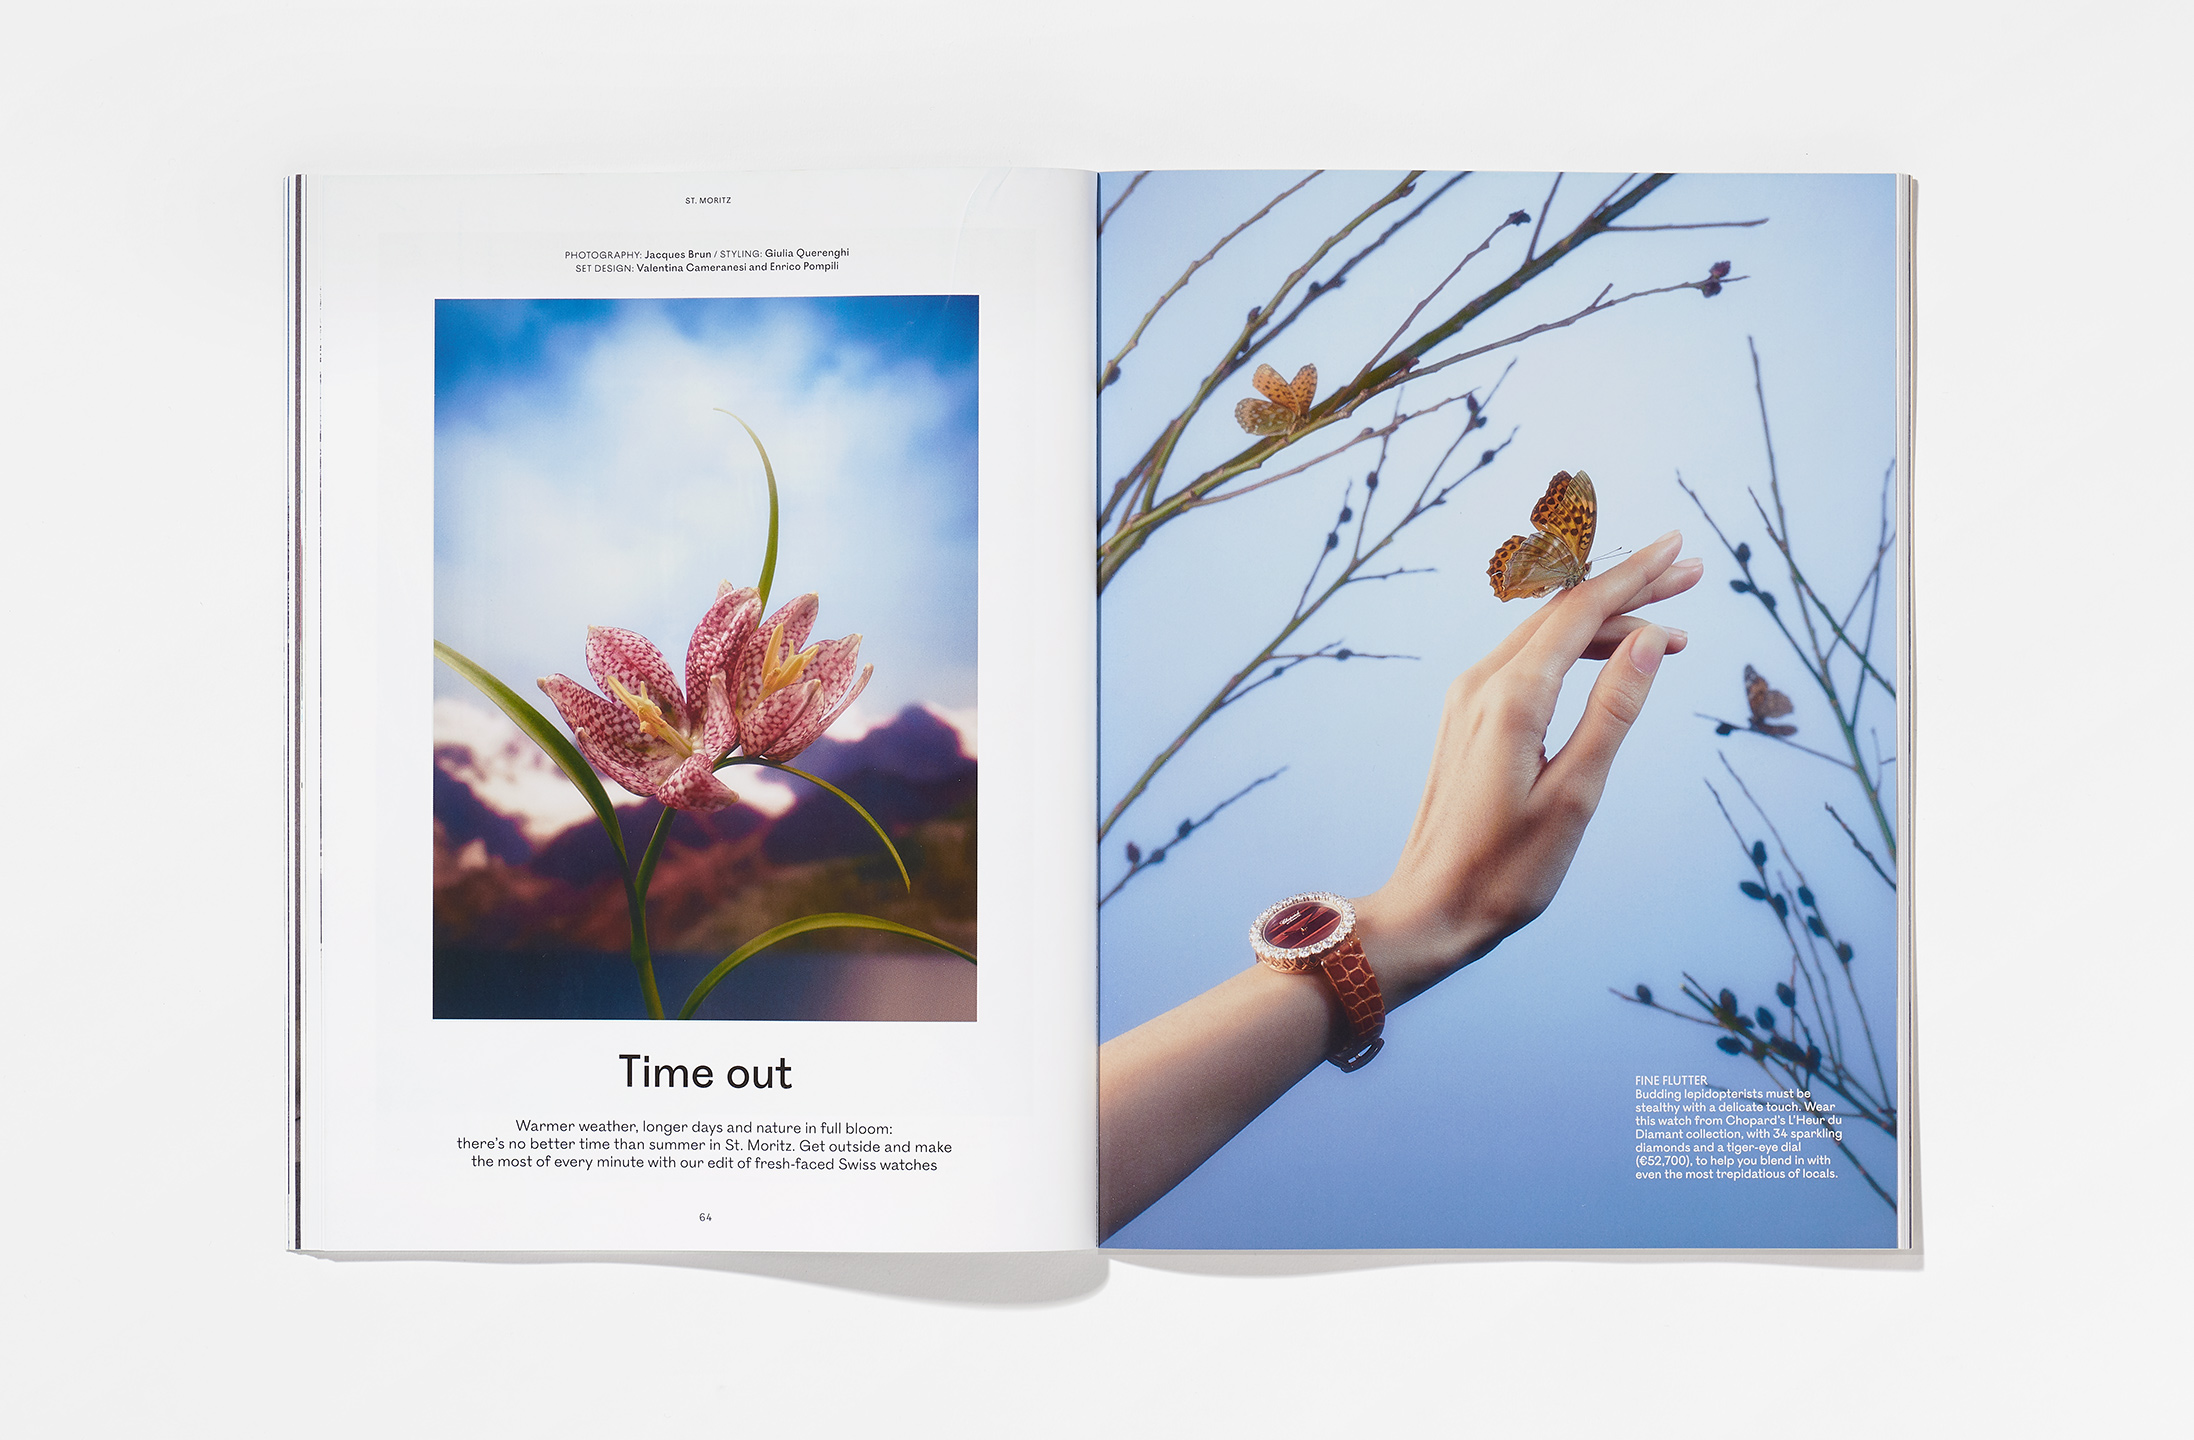 Identity, editorial design and art direction for St. Moritz Magazine, (2019)